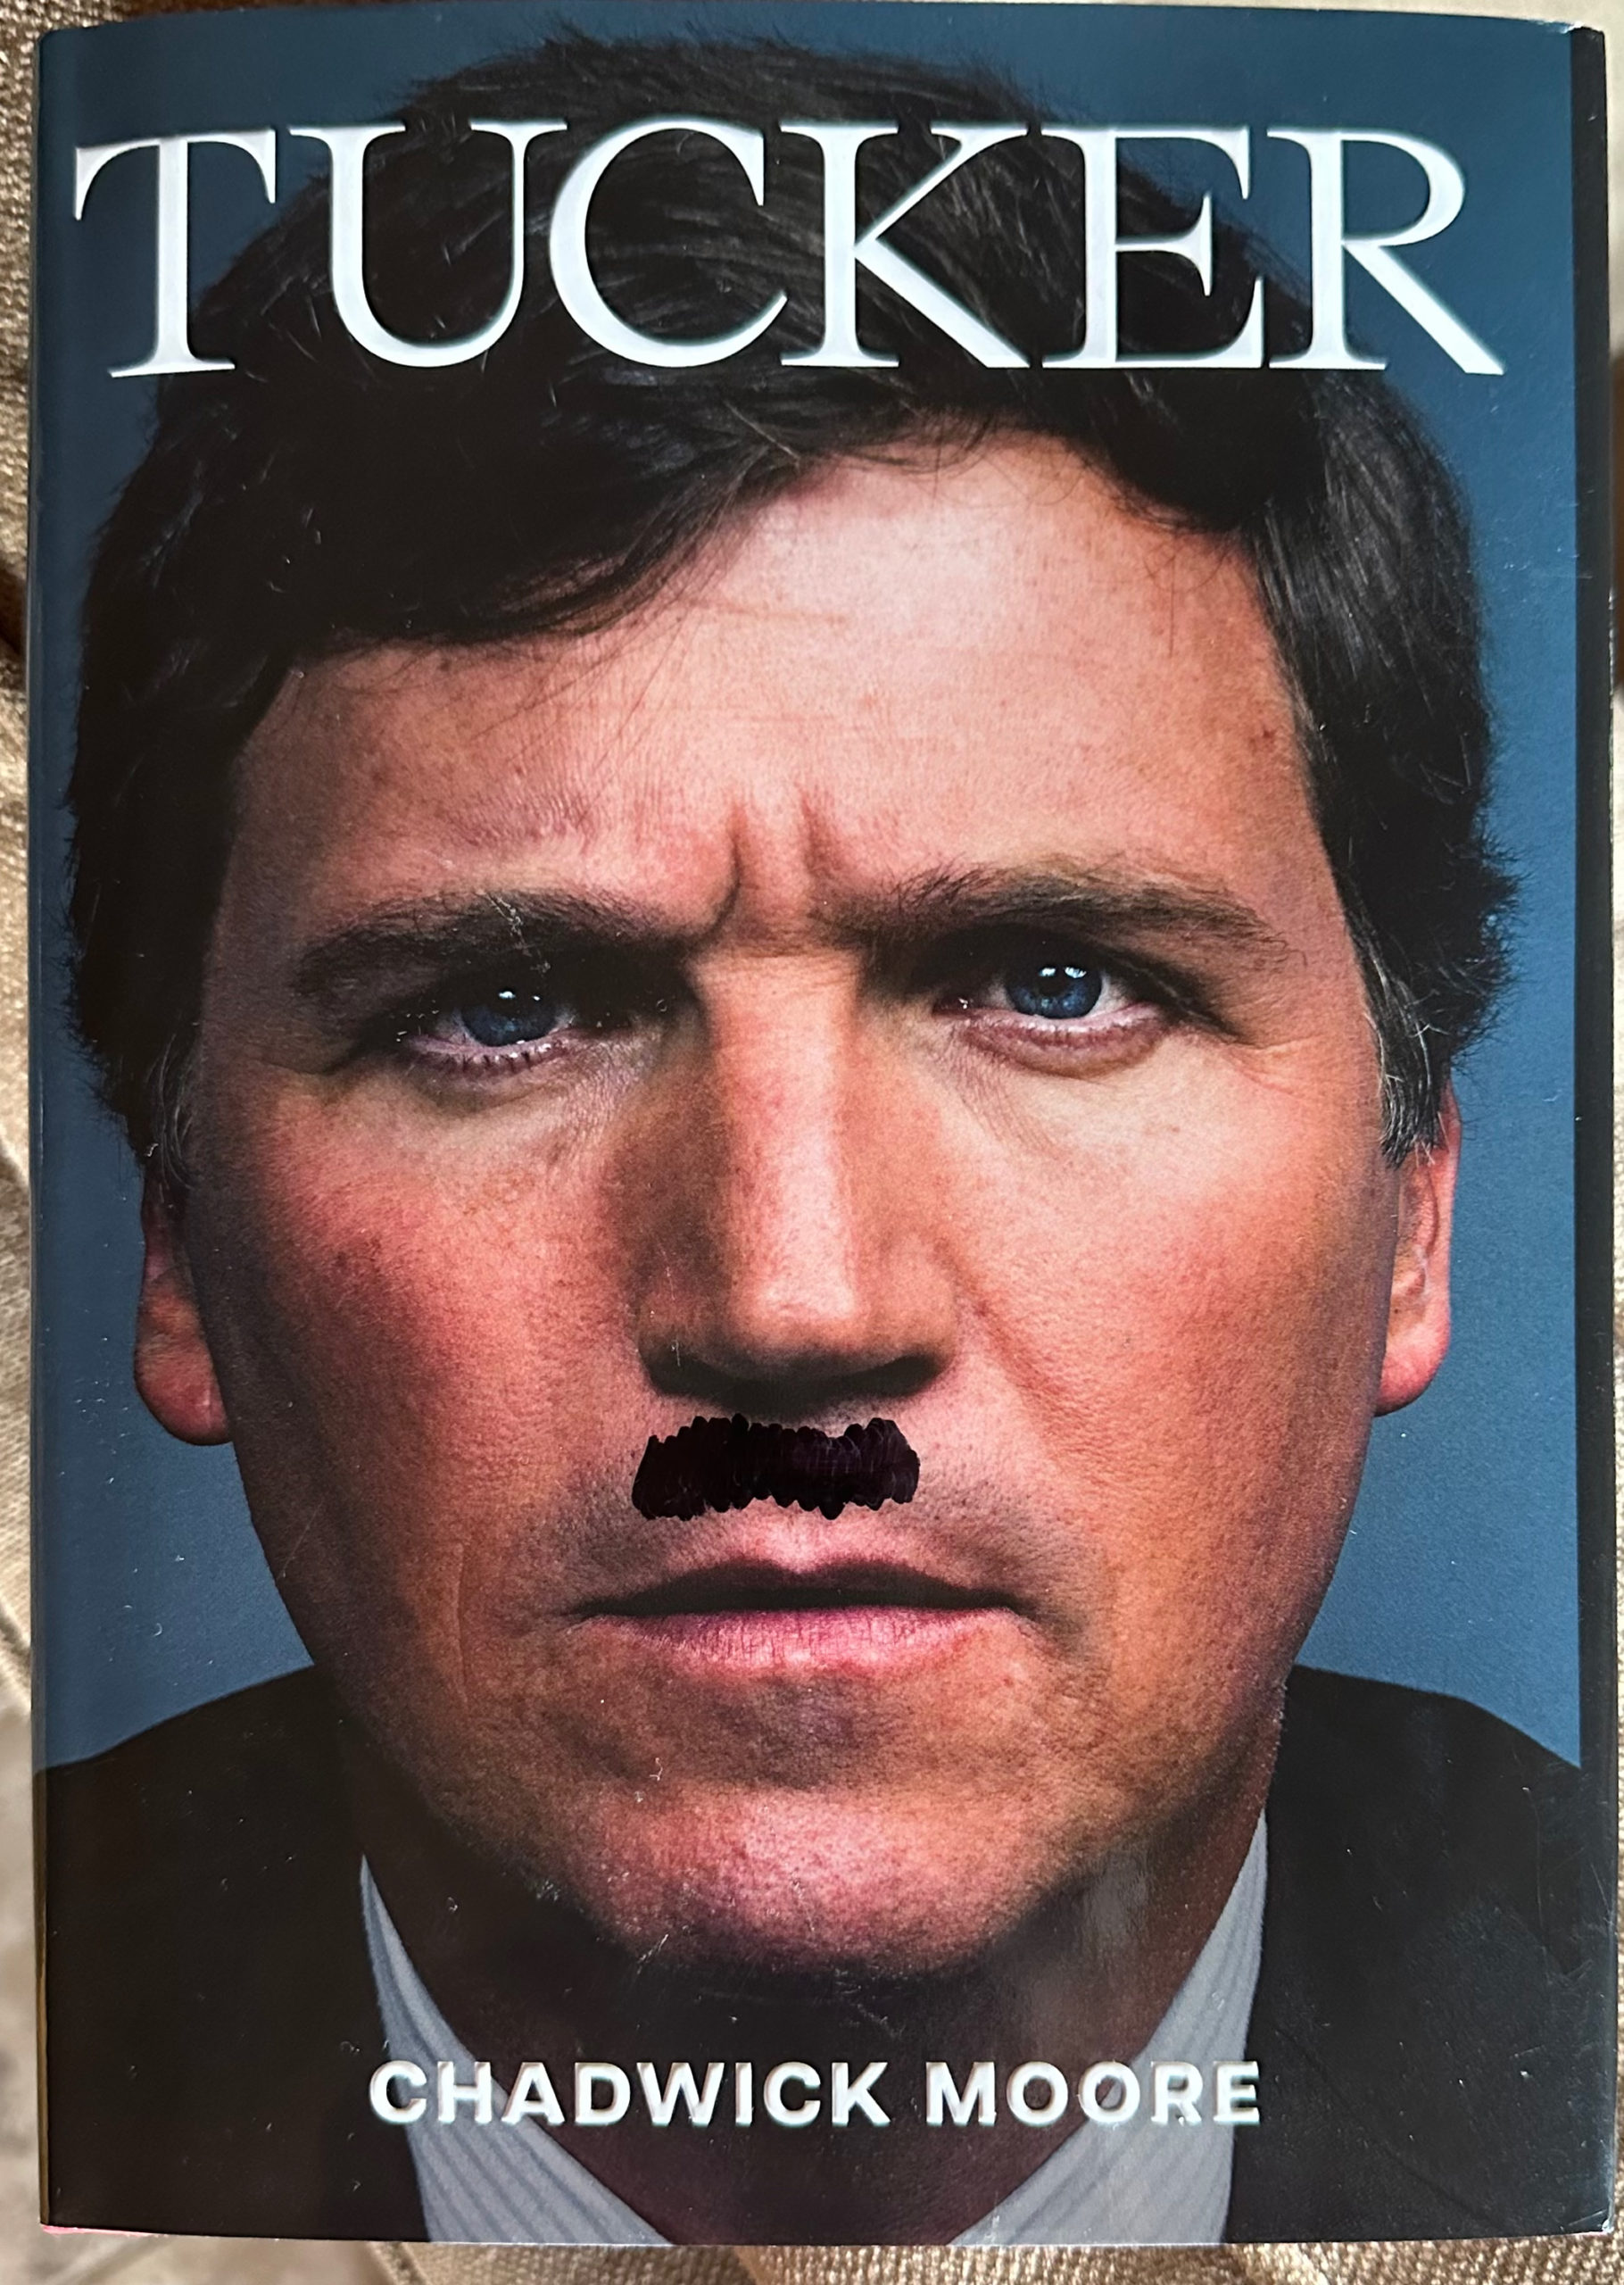 Glenn Dobbs was shocked when he opened an Amazon package with Tucker Carlson's biography. "I couldn't believe that someone in business would do something like that,” he said.